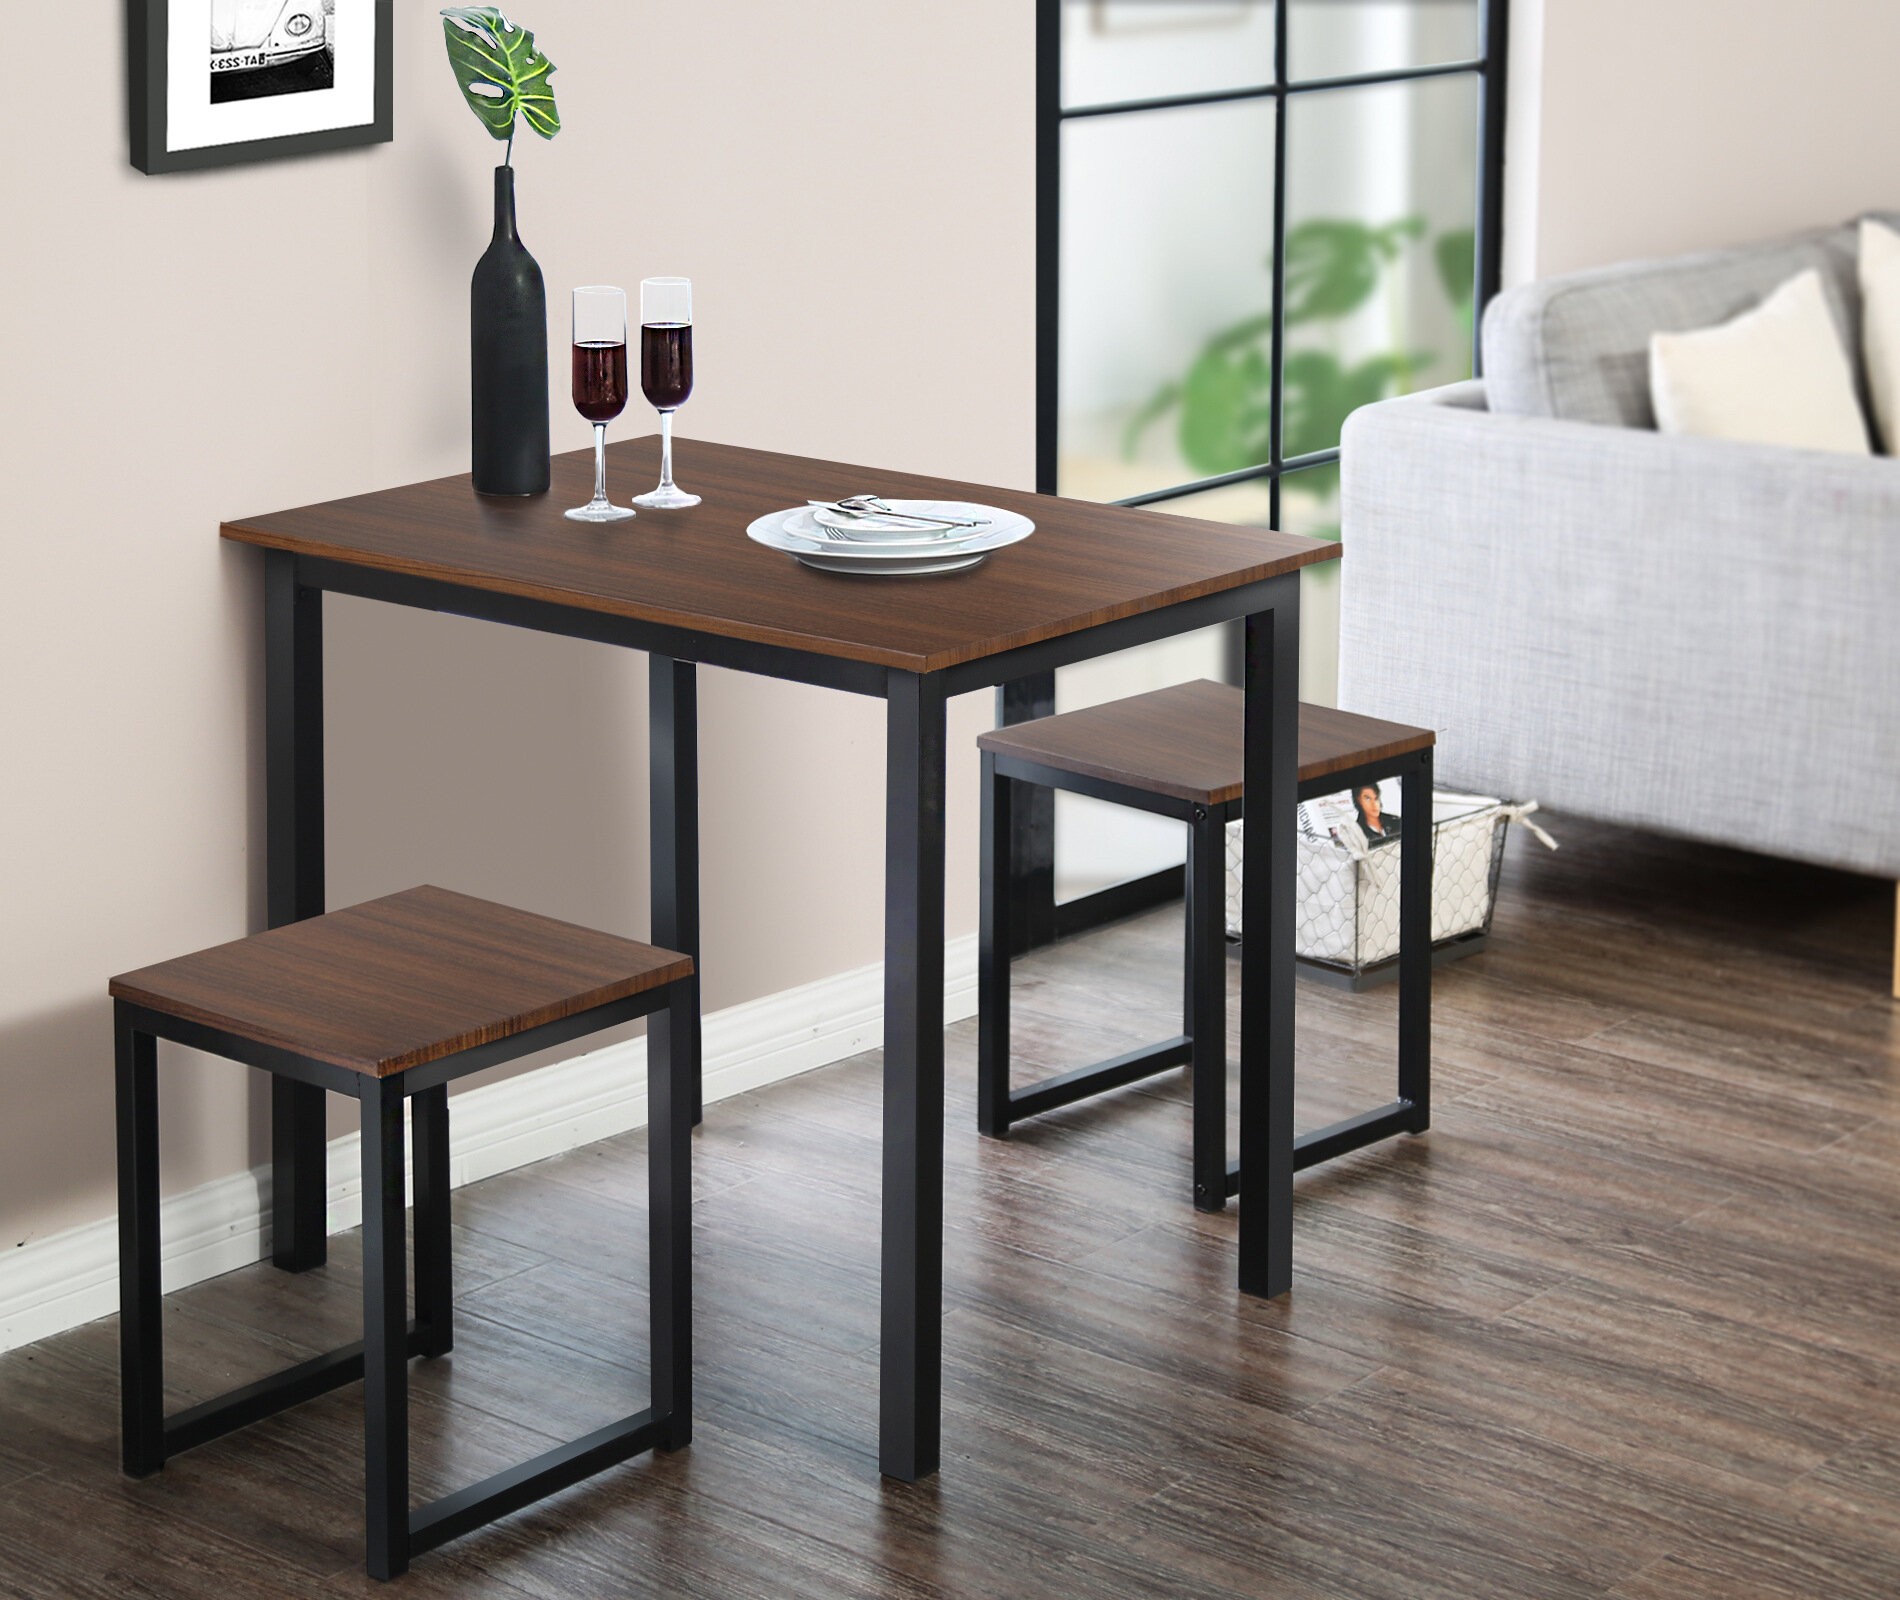 Small Table For 2 For Small Kitchen : 3 Piece Small Kitchen Table Set